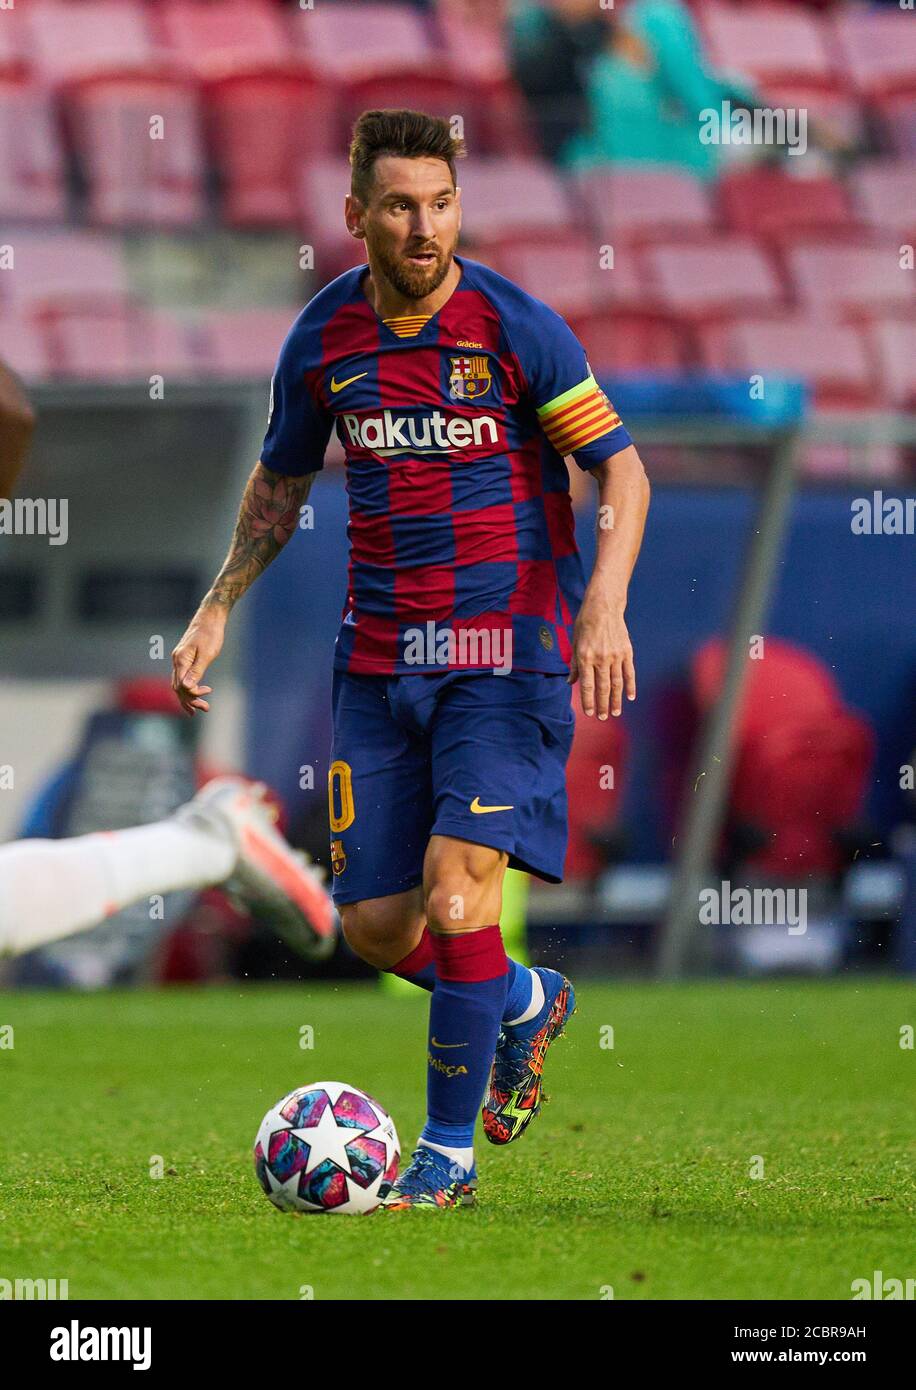 Lisbon, Lissabon, Portugal, 14th August 2020. Lionel MESSI, Barca 10 with  ball in the quarterfinal UEFA Champions League match final tournament FC  BAYERN MUENCHEN - FC BARCELONA 8-2 in Season 2019/2020, FCB,